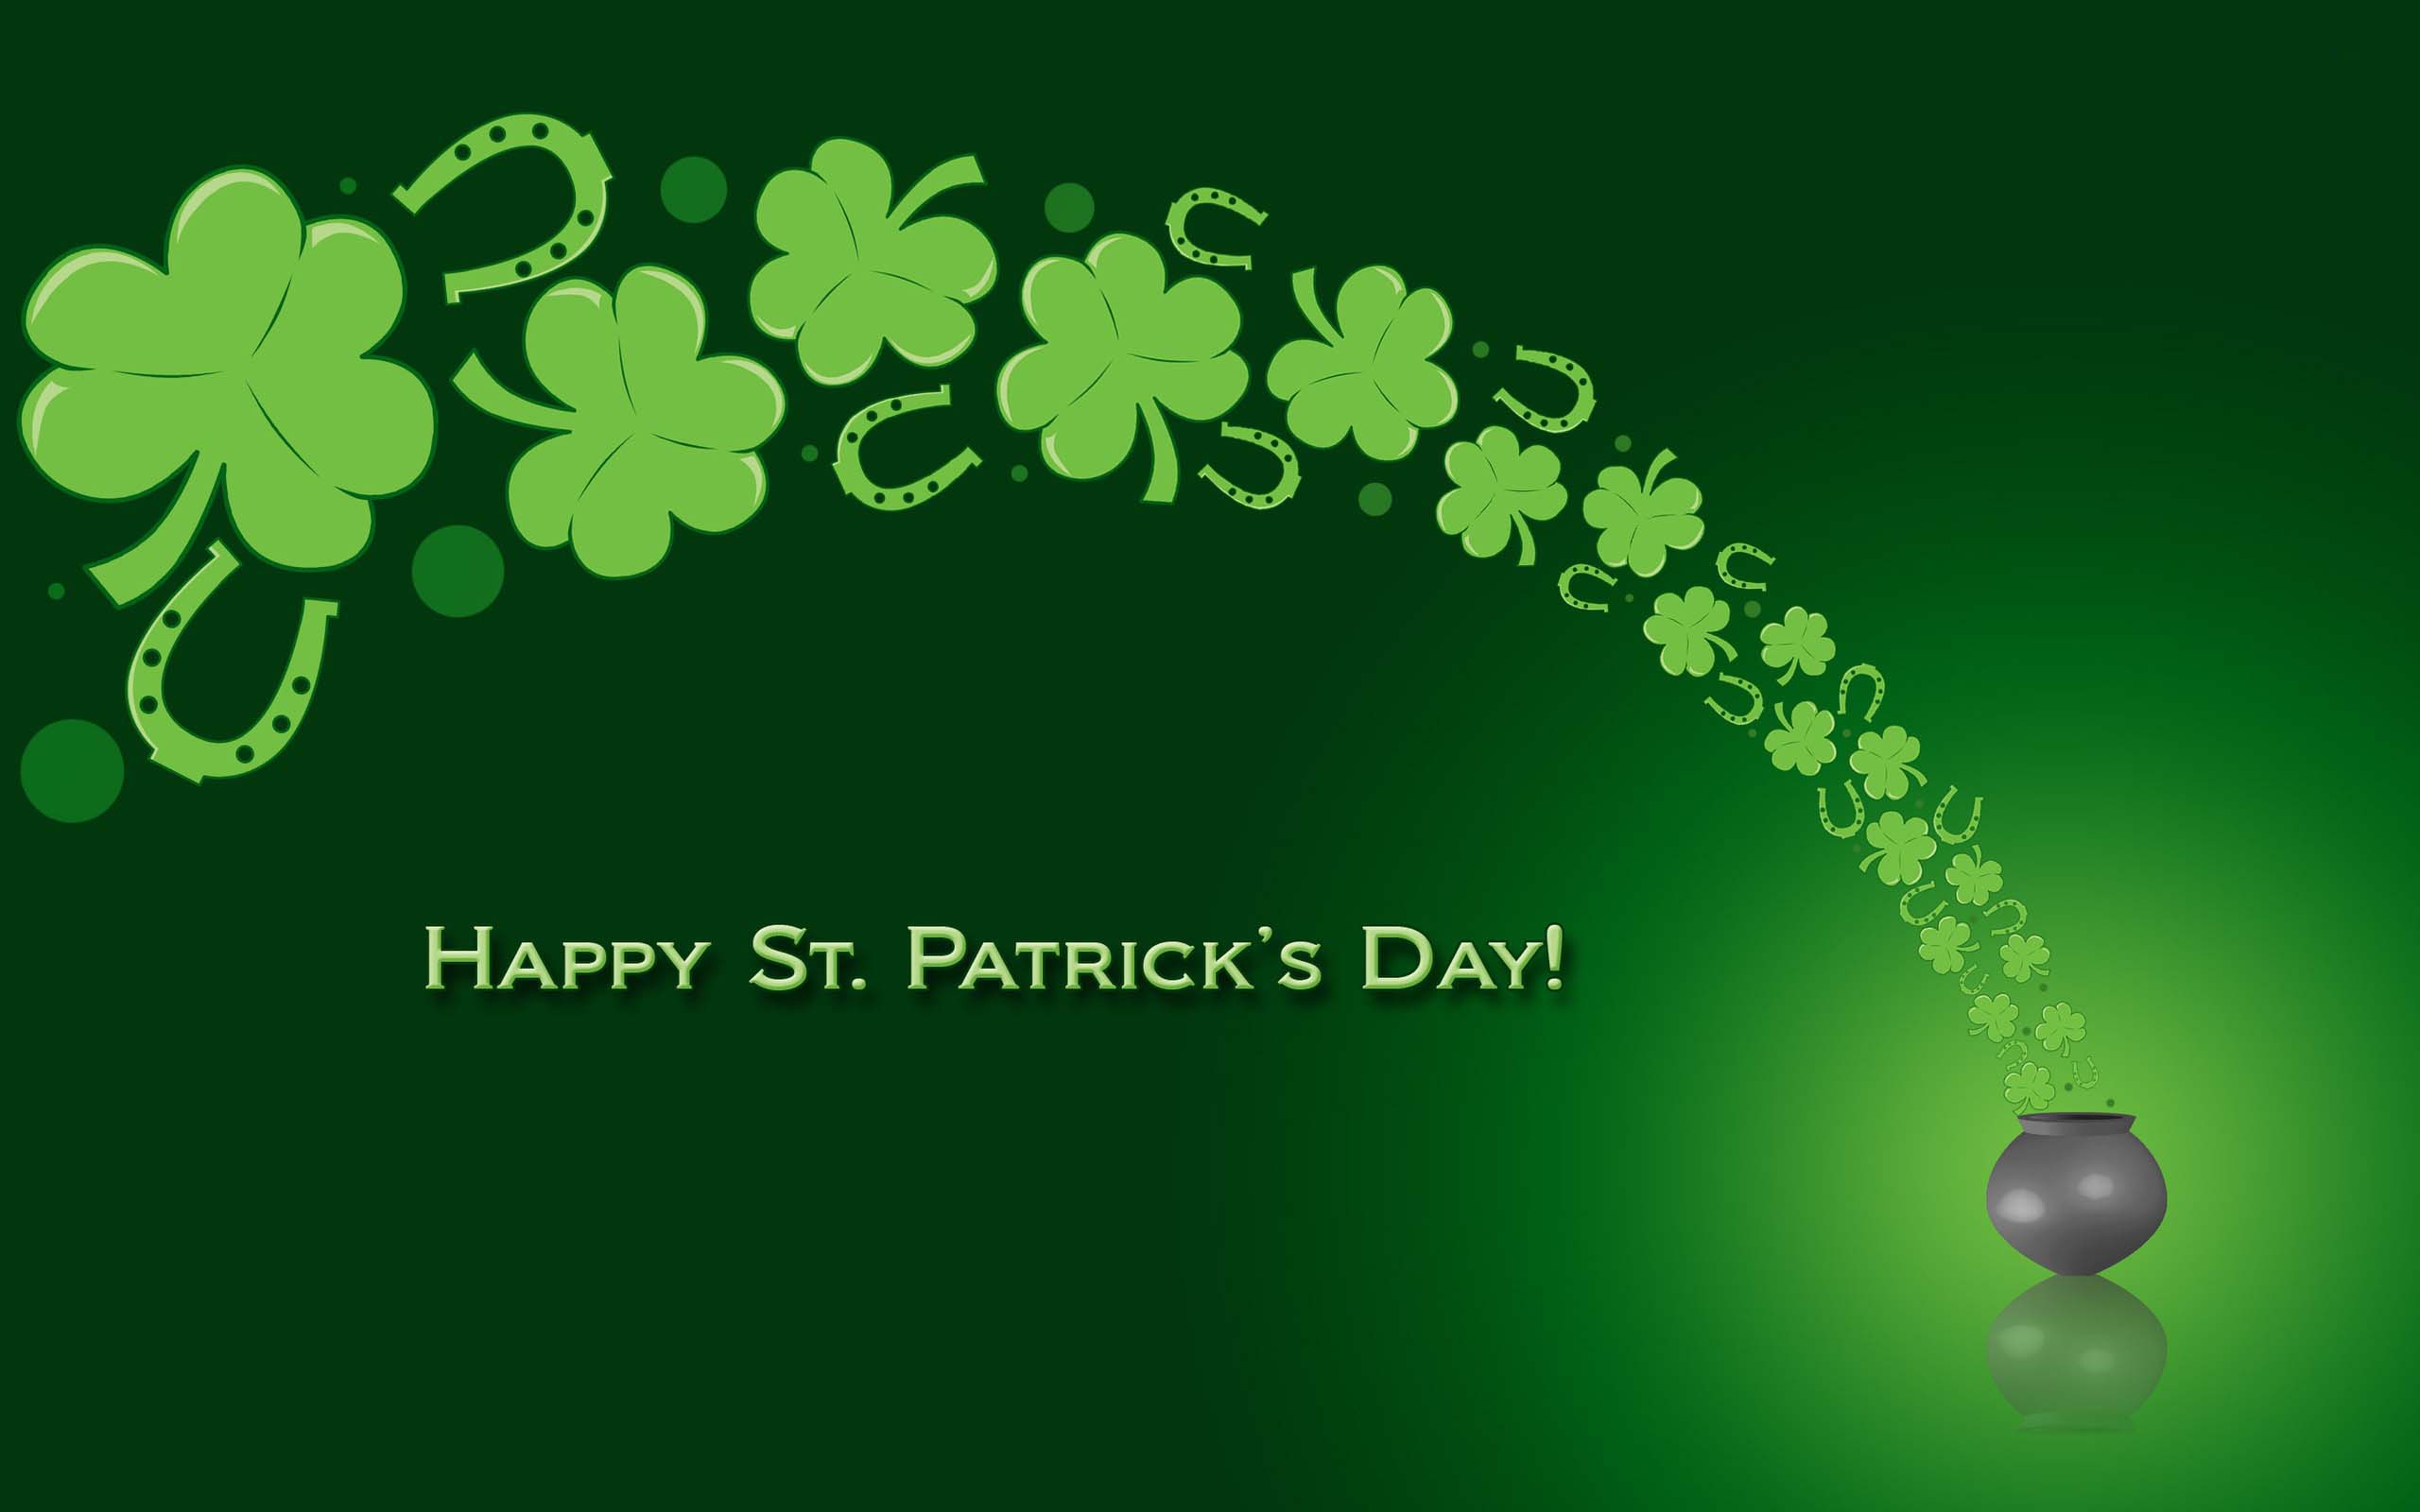 Happy St. Patricks Day 2016 Pictures Wallpaper - USA Festival